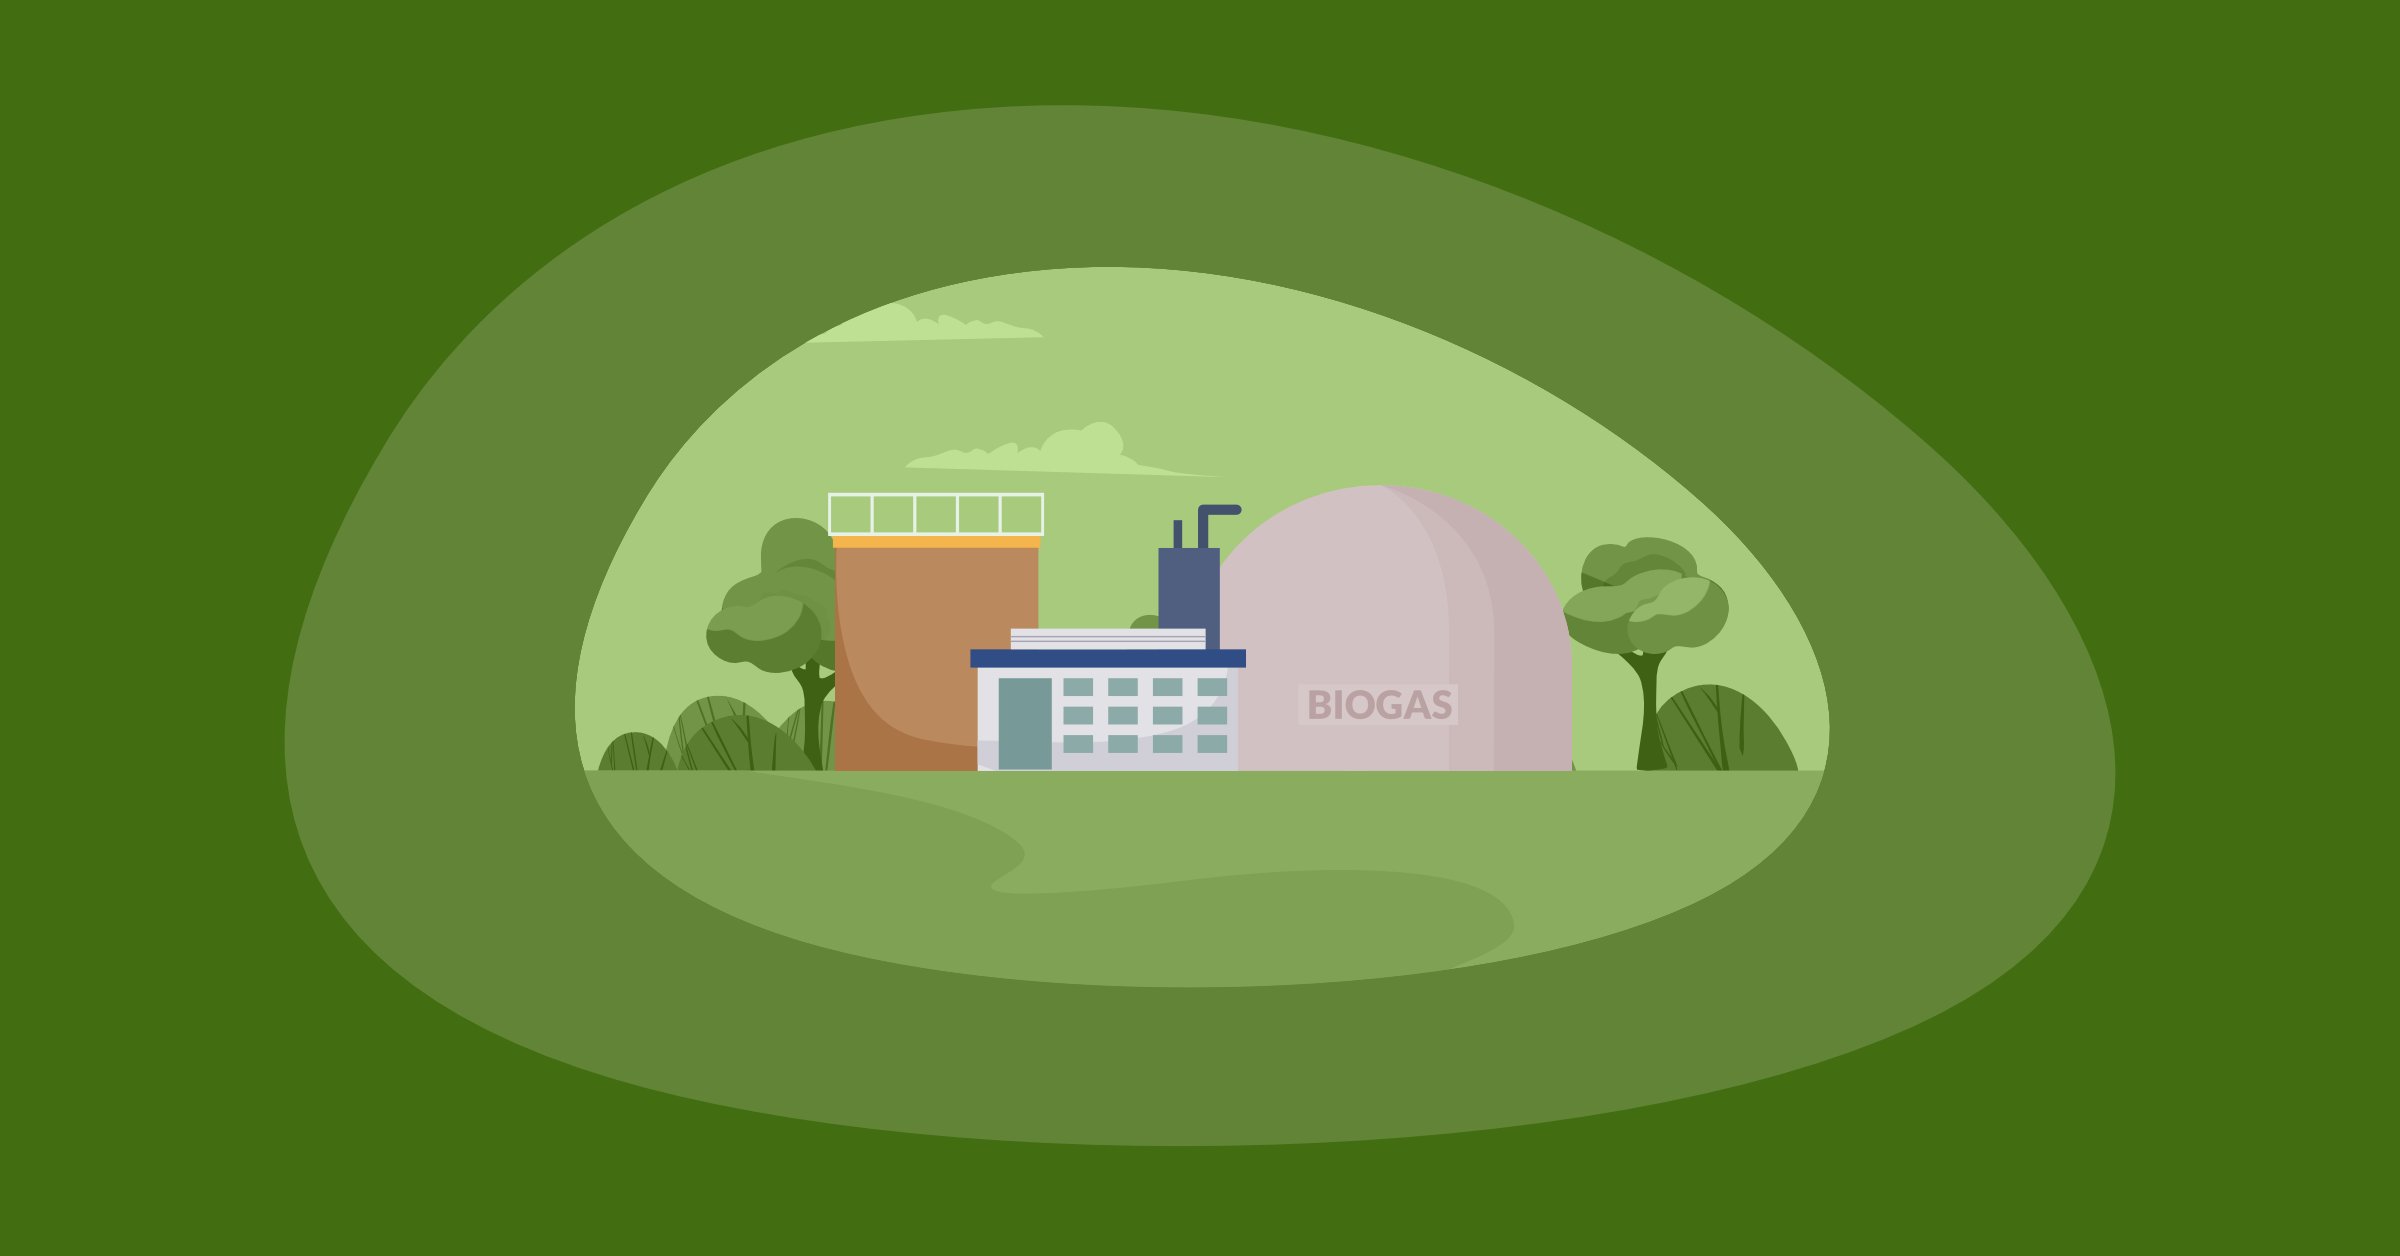 What Is the Carbon Footprint of Biogas? A Life-Cycle Assessment | Impactful  Ninja